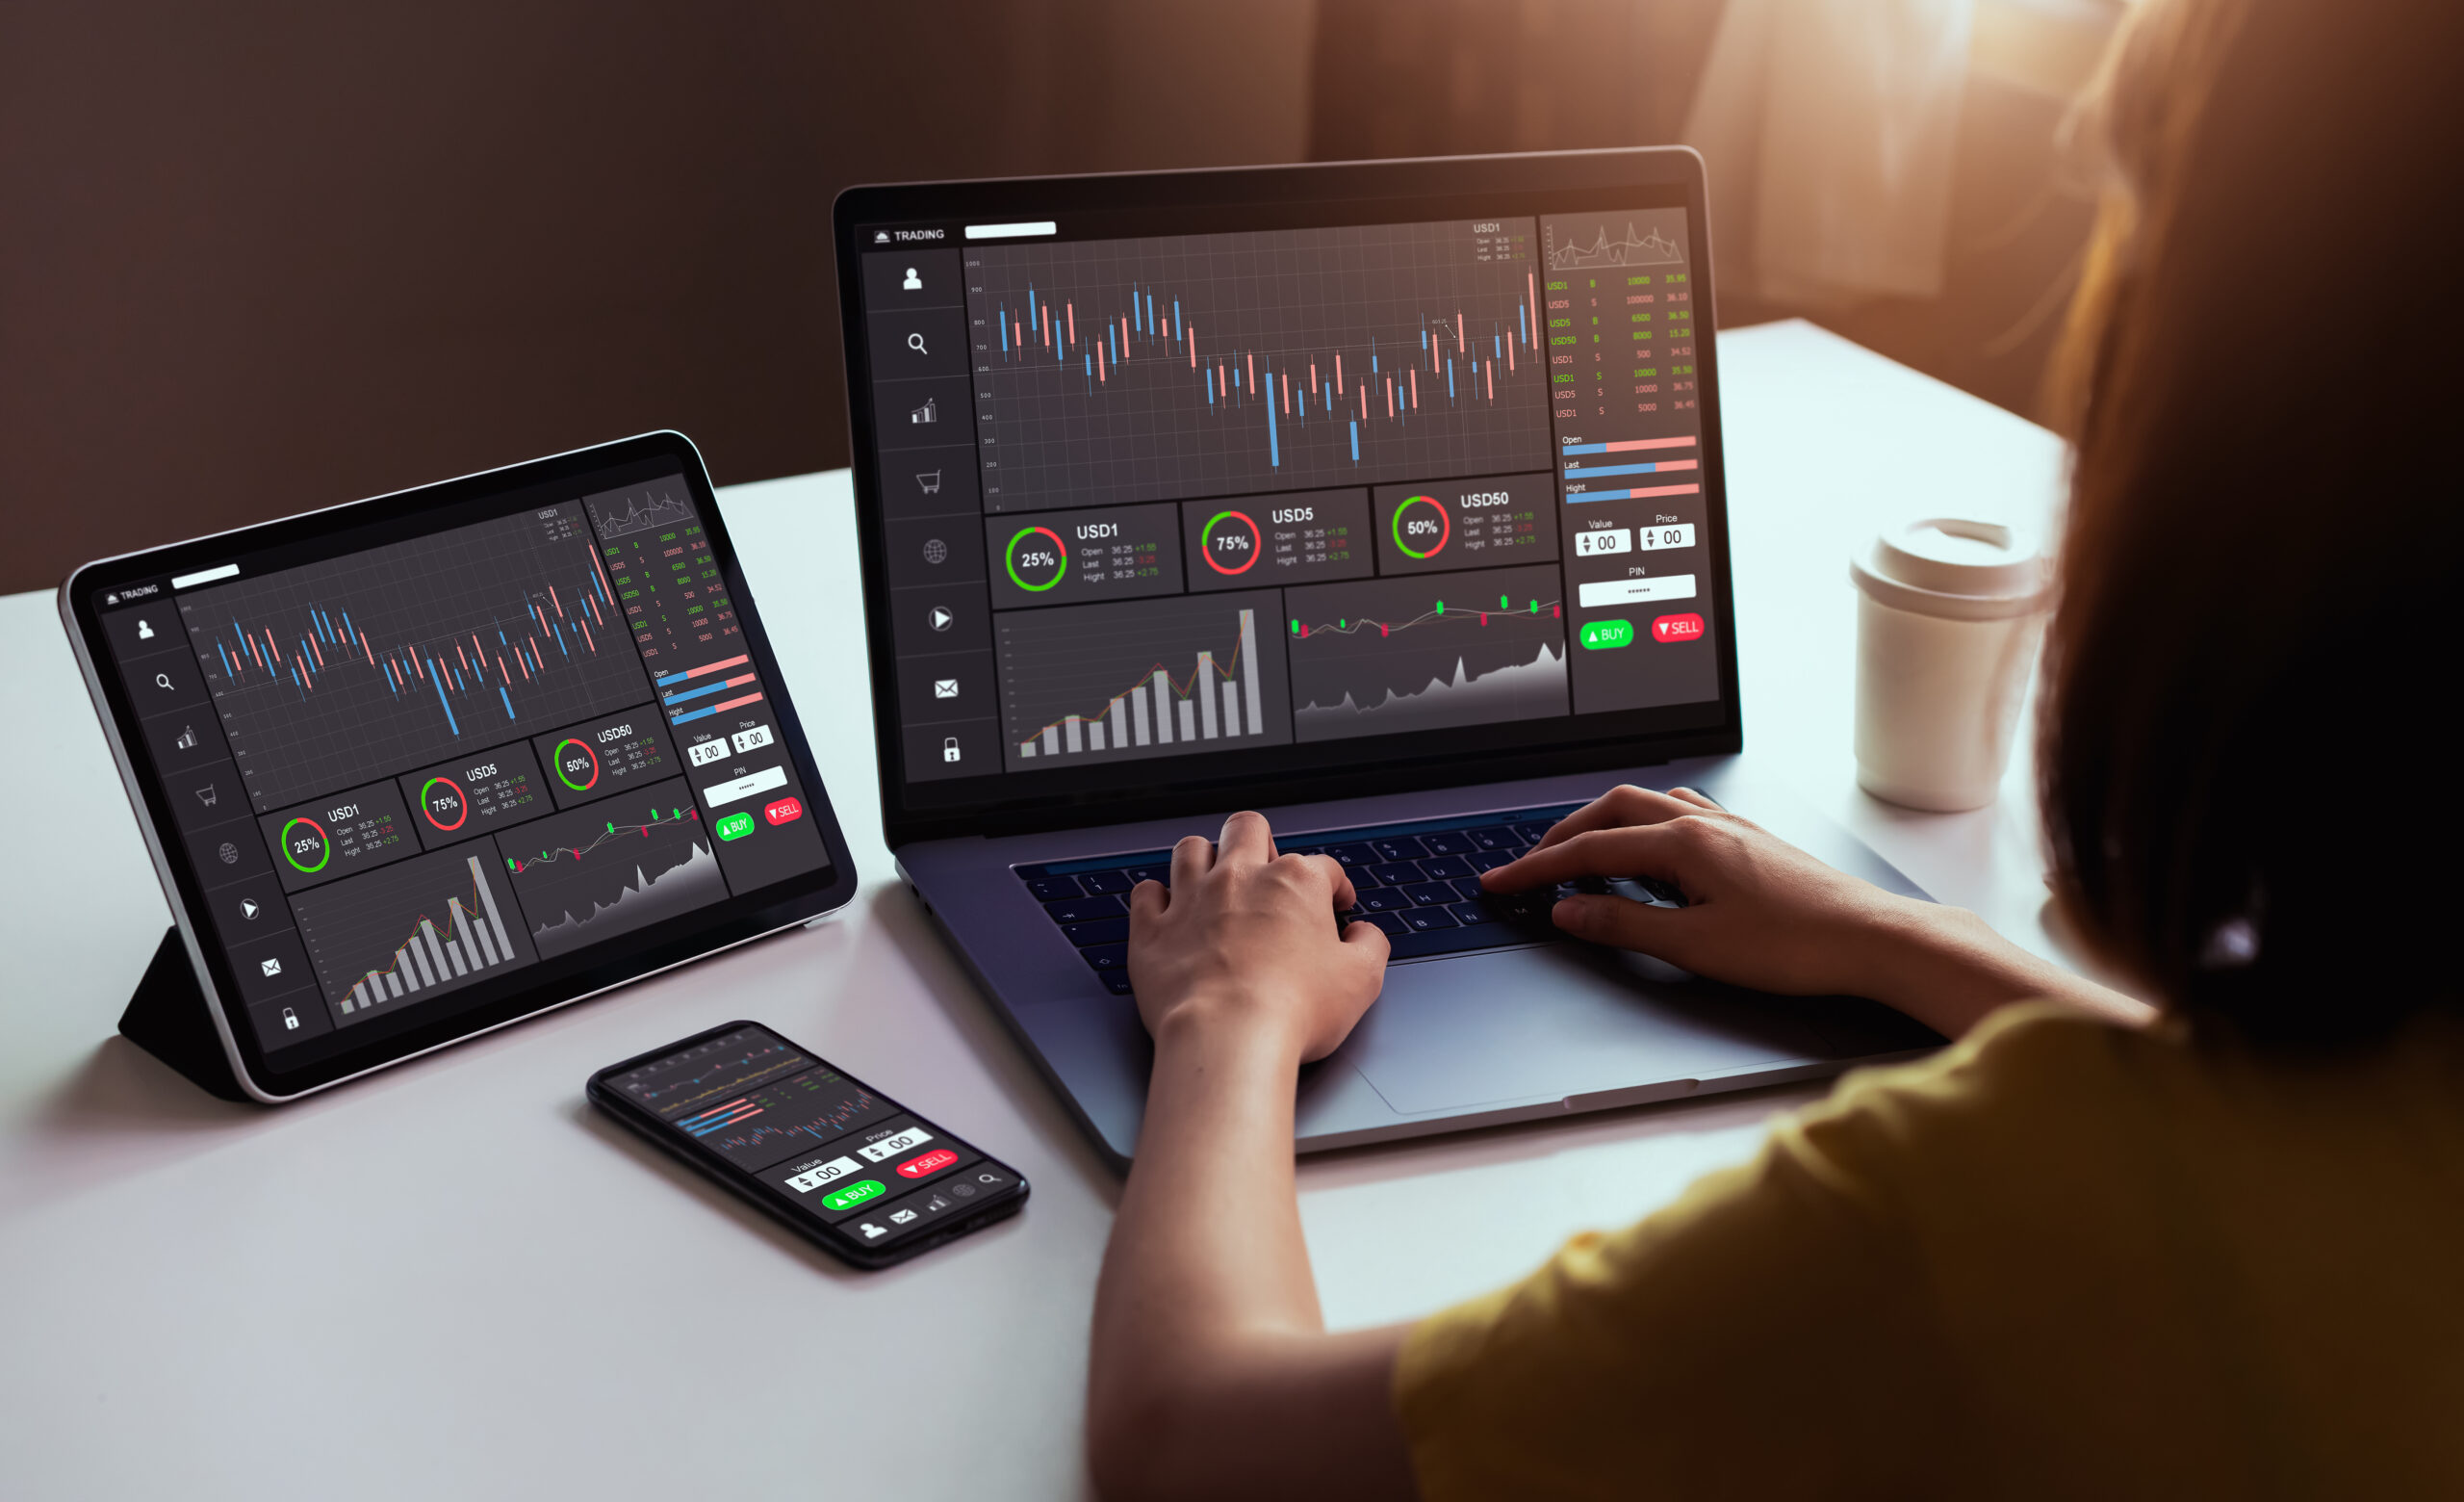 A businesswoman a copy trading, focused and engaged, analyzing graphs and candlestick patterns on her laptop, tablet, and smartphone. She is utilizing technology to make informed trading decisions and stay updated on market trends.